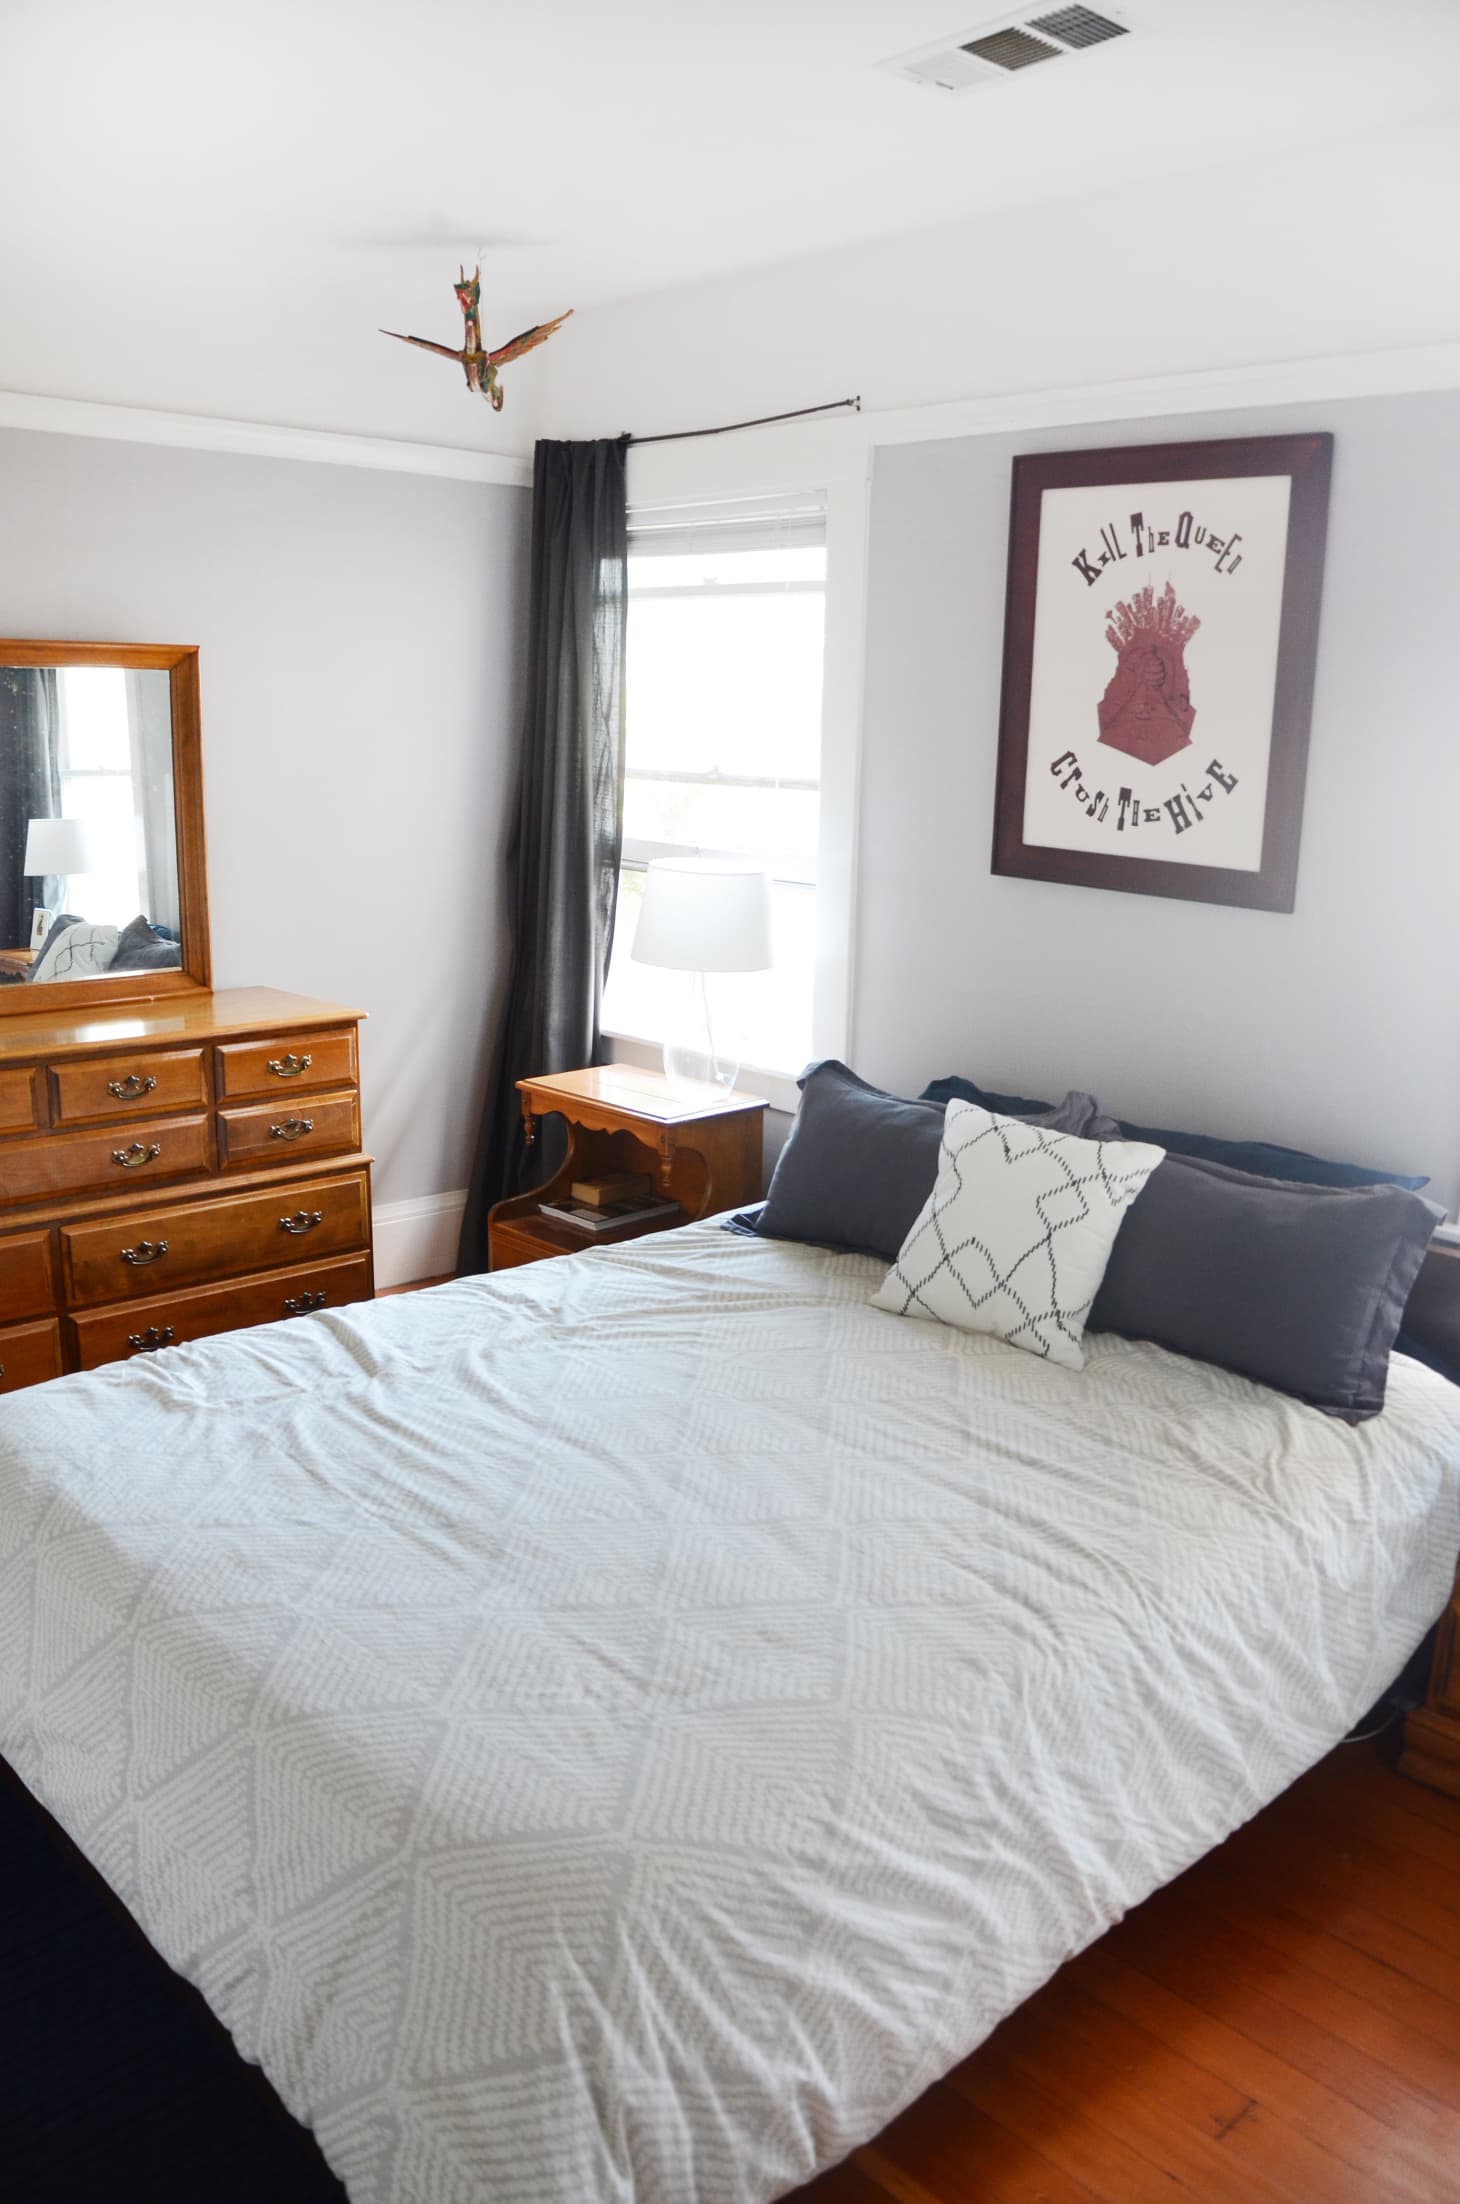 House Tour: A Sunny and Spacious Oakland Rental ...